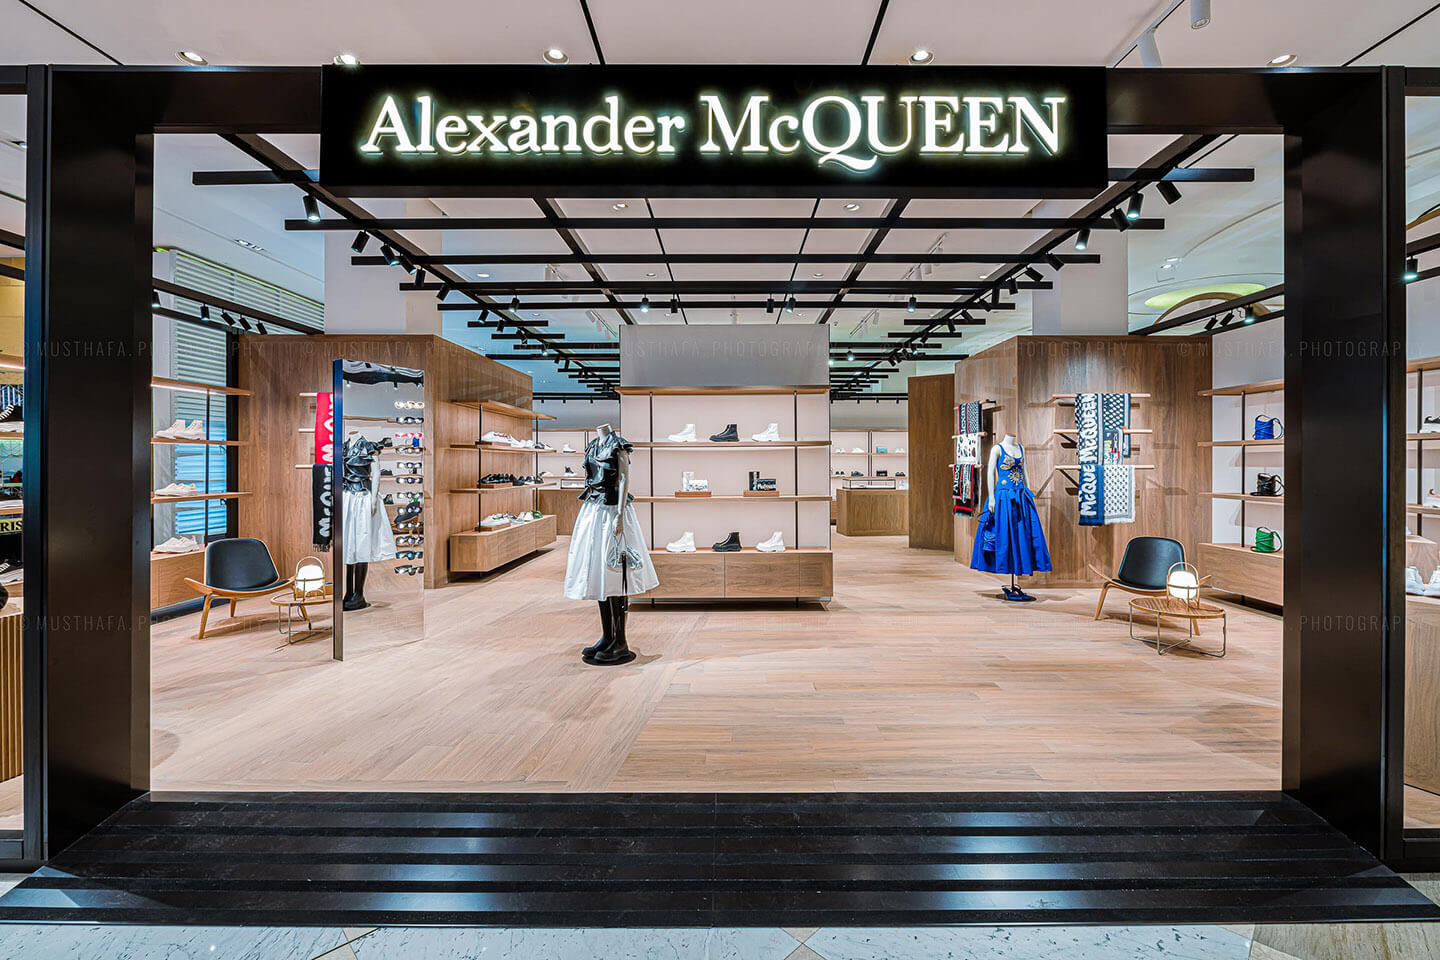 After Alexander Mcqueen Level Store Dubai Mall Editing Photography Techniques Interior UAE Abu Dhabi 1